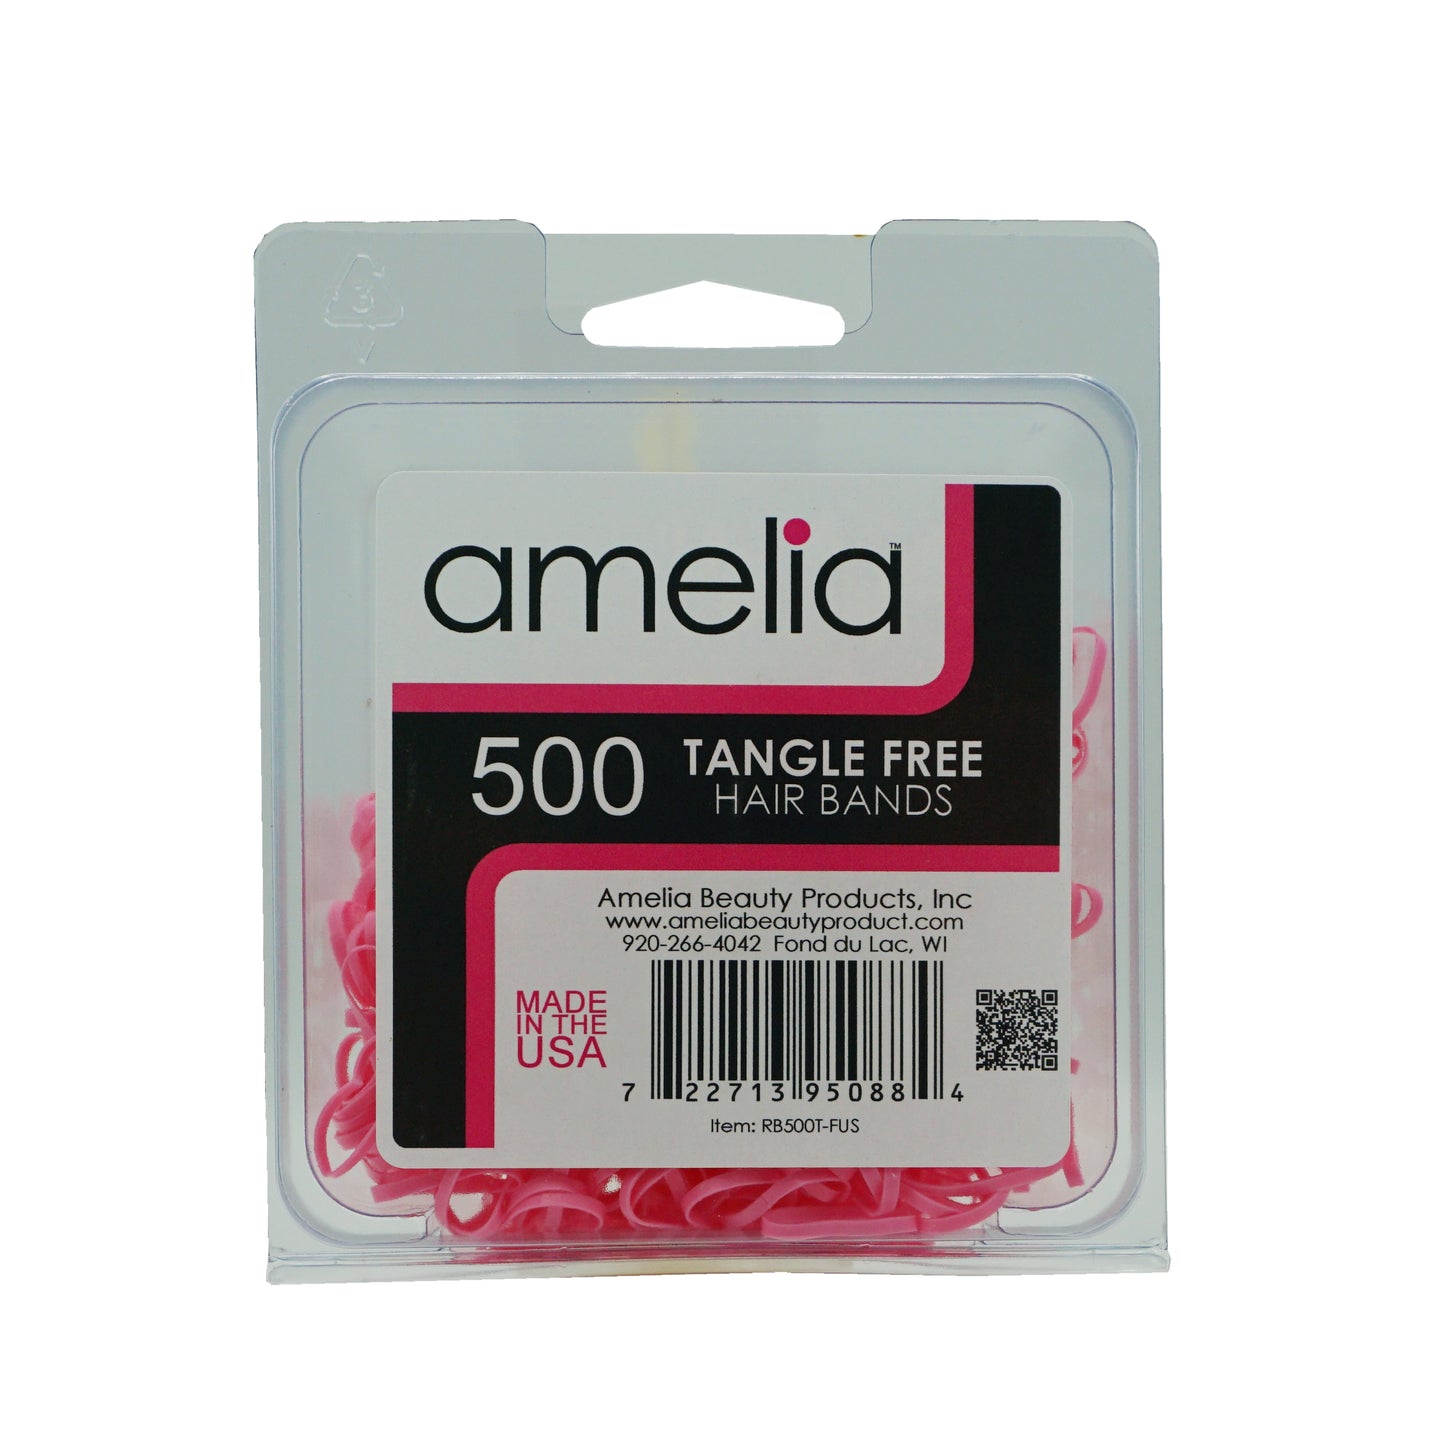 Amelia Beauty | 1/2in, Fuchsia, Tangle Free Elastic Pony Tail Holders | Made in USA, Ideal for Ponytails, Braids, Twists. For Women, Girls. Pain Free, Snag Free, Easy Off | 500 Pack